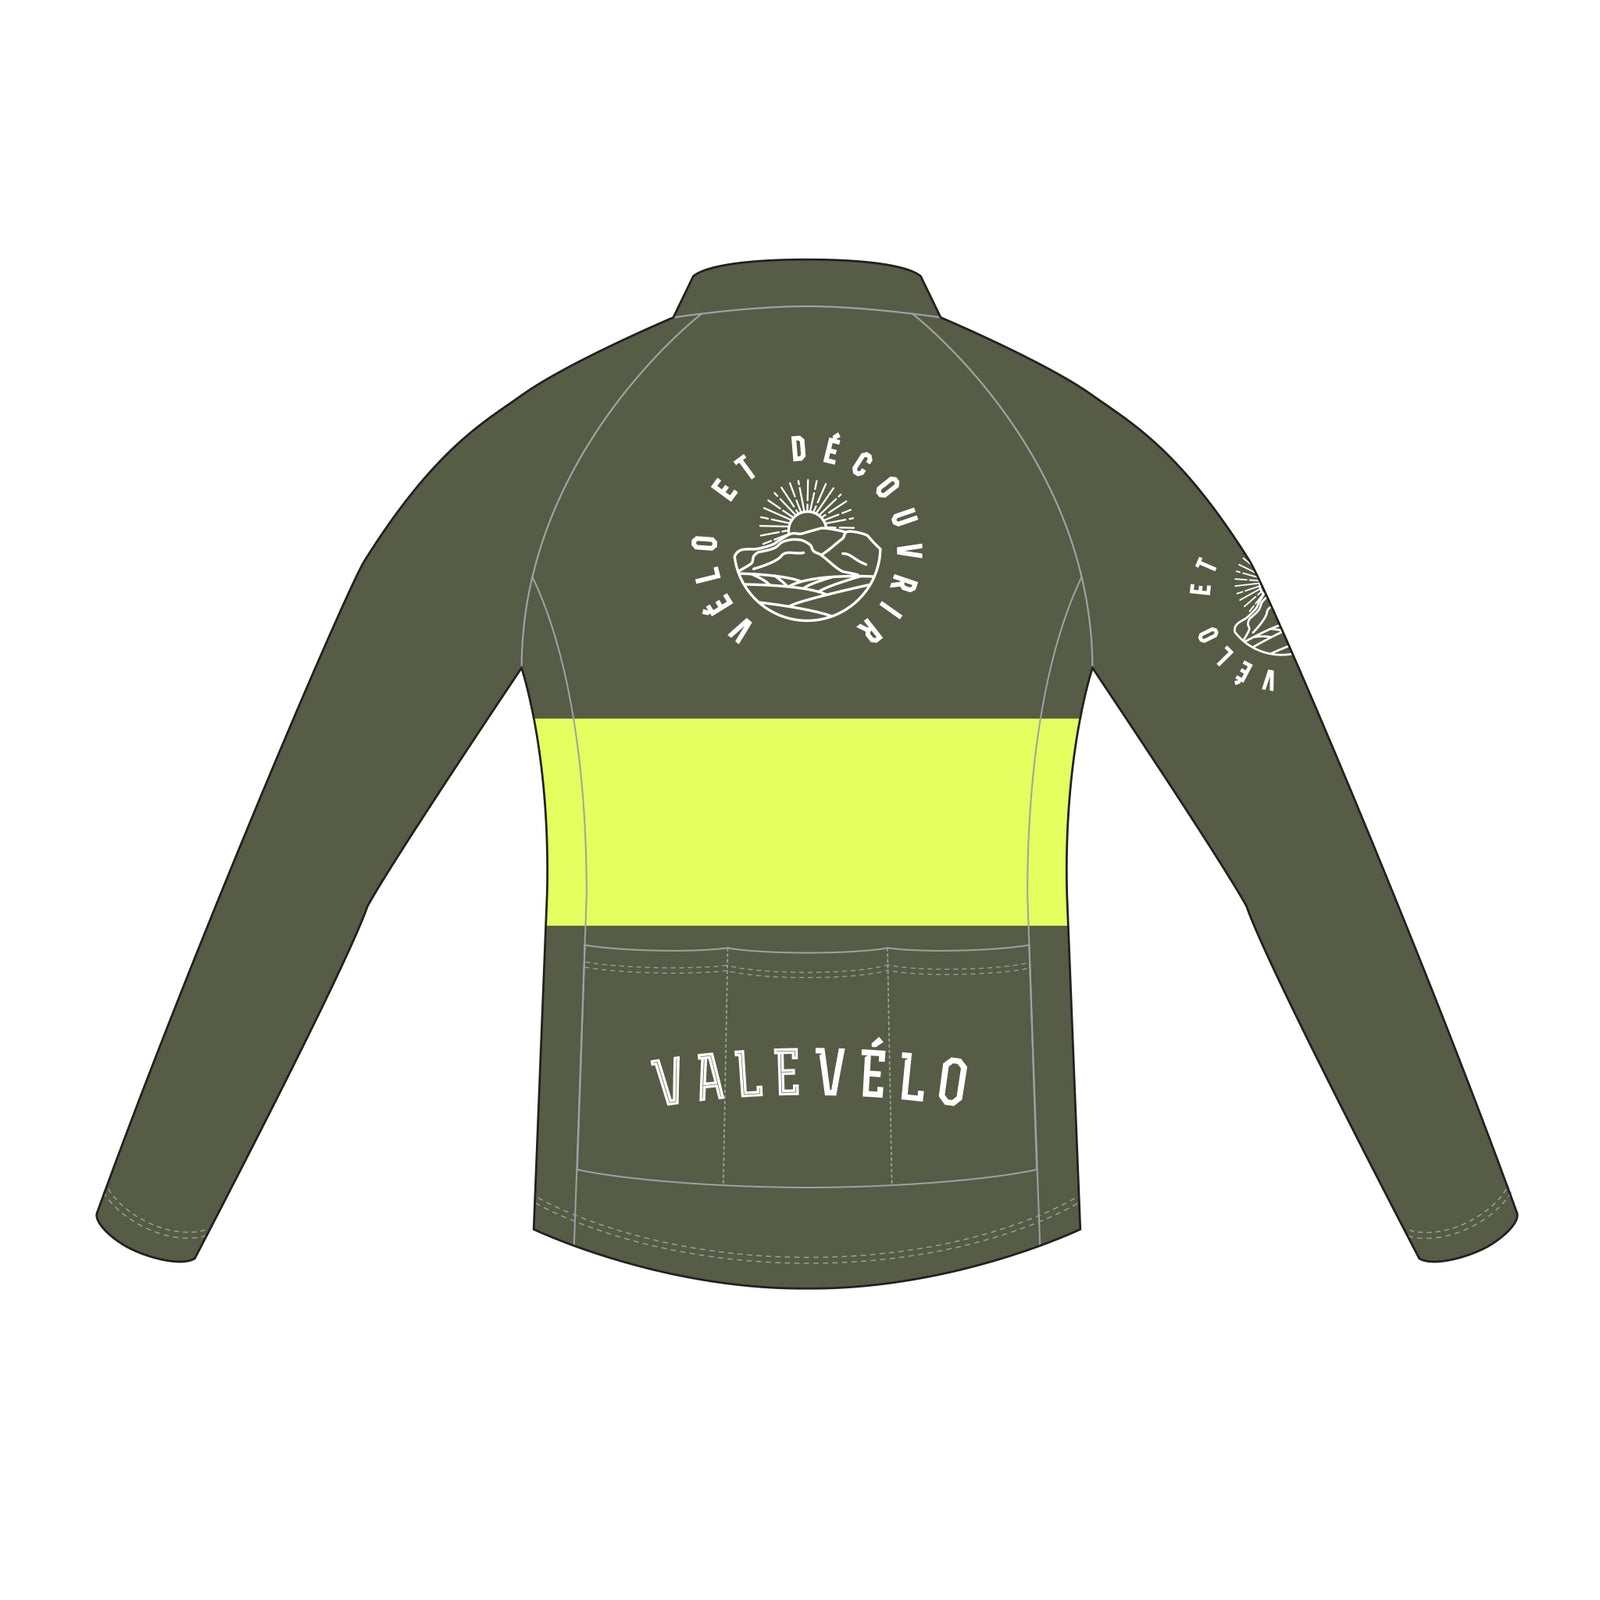 VALEVELO Men’s Race Cut PLATINUM Thermal Long Sleeve Cycling Jersey, ARMY GREEN